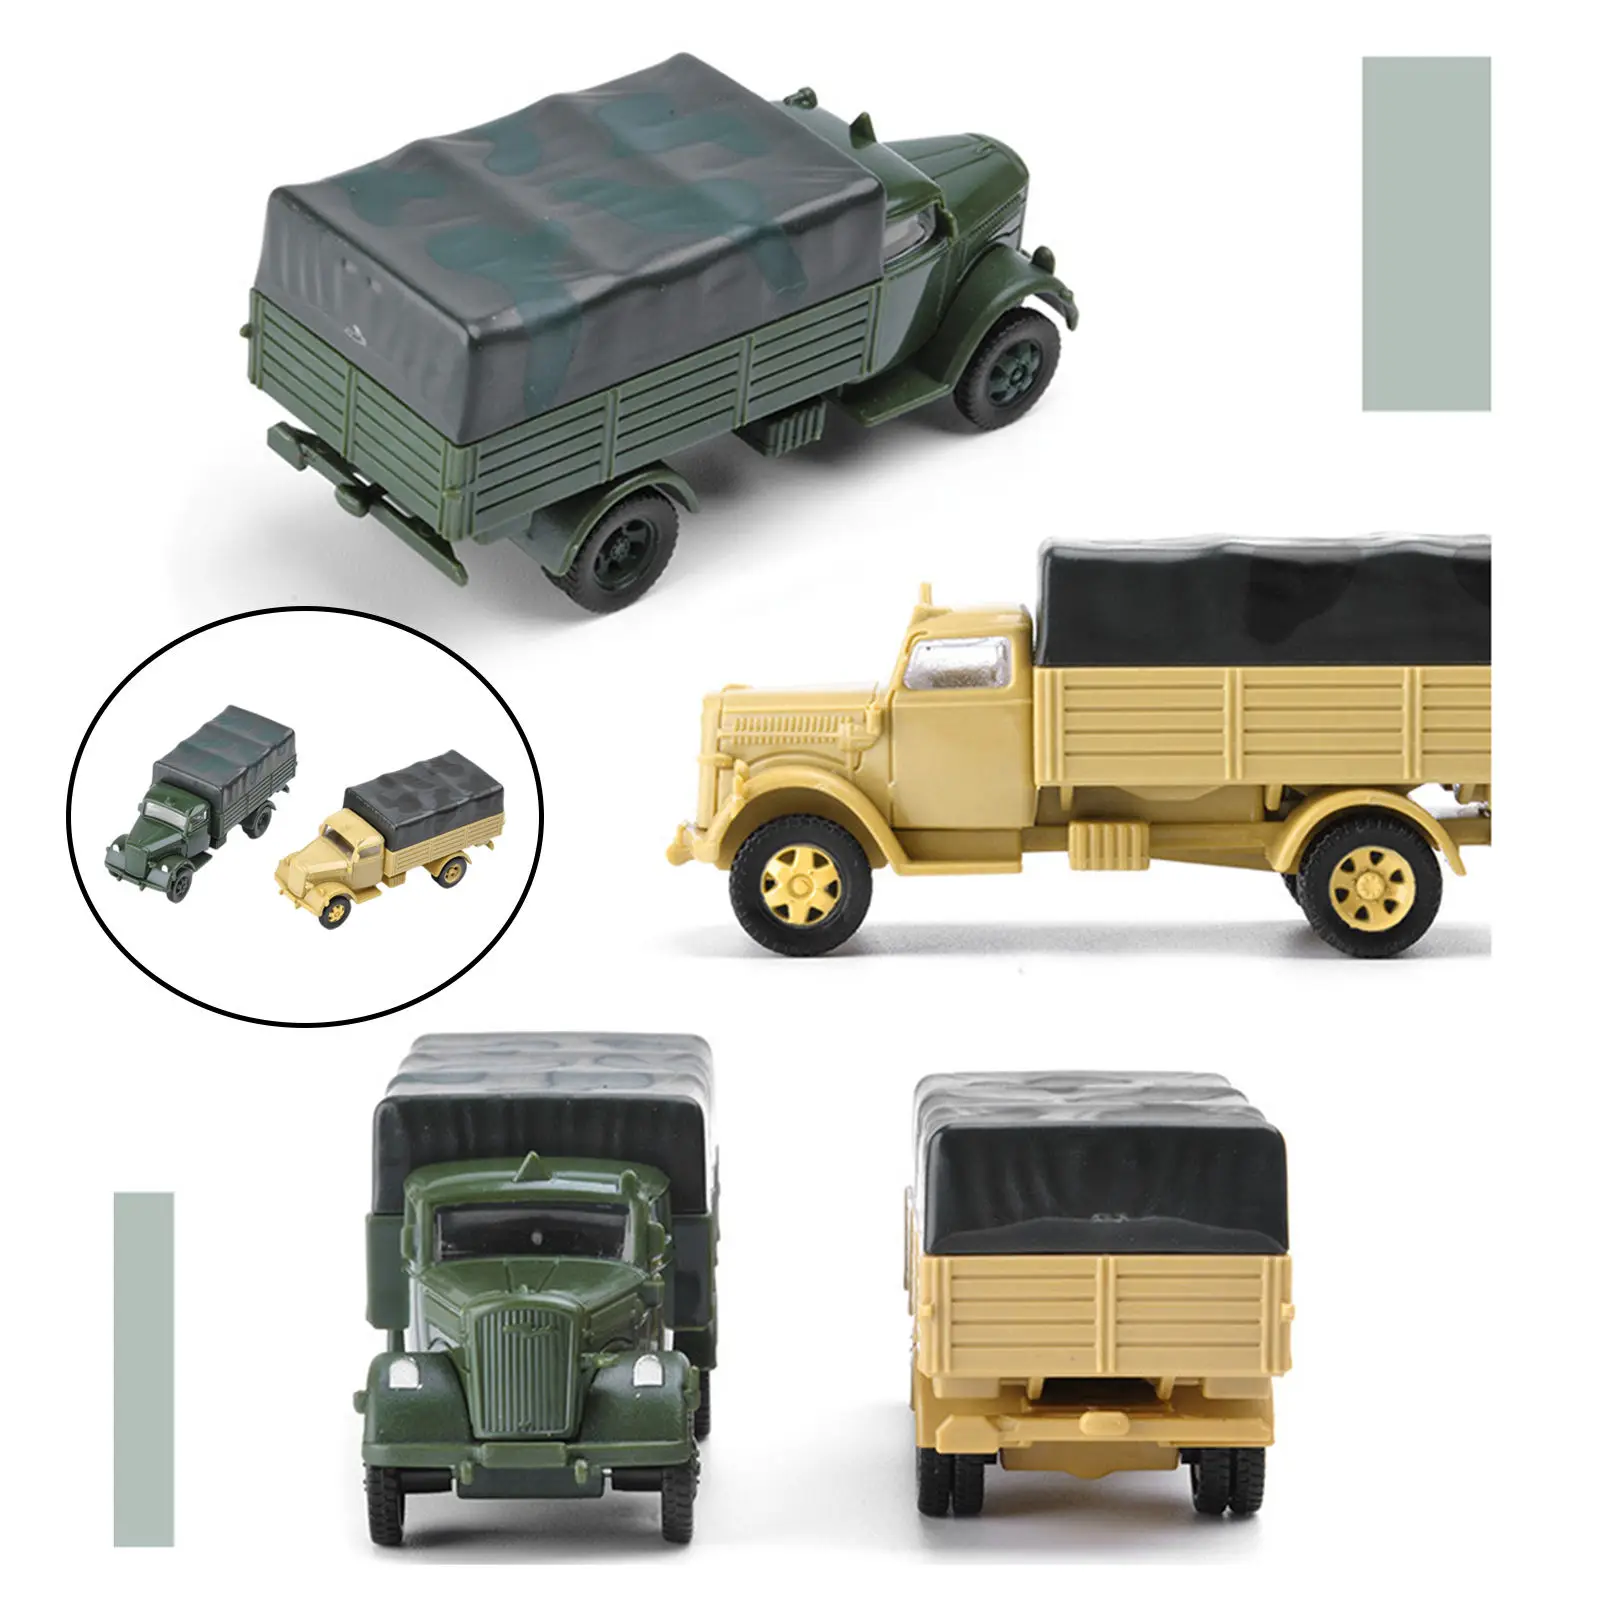 Set of 2 1:72 4D Assemble Truck Plastic Building Kit Educational Toy Simulation Chariot 80 Wheeled Collectibles Armored Vehicle